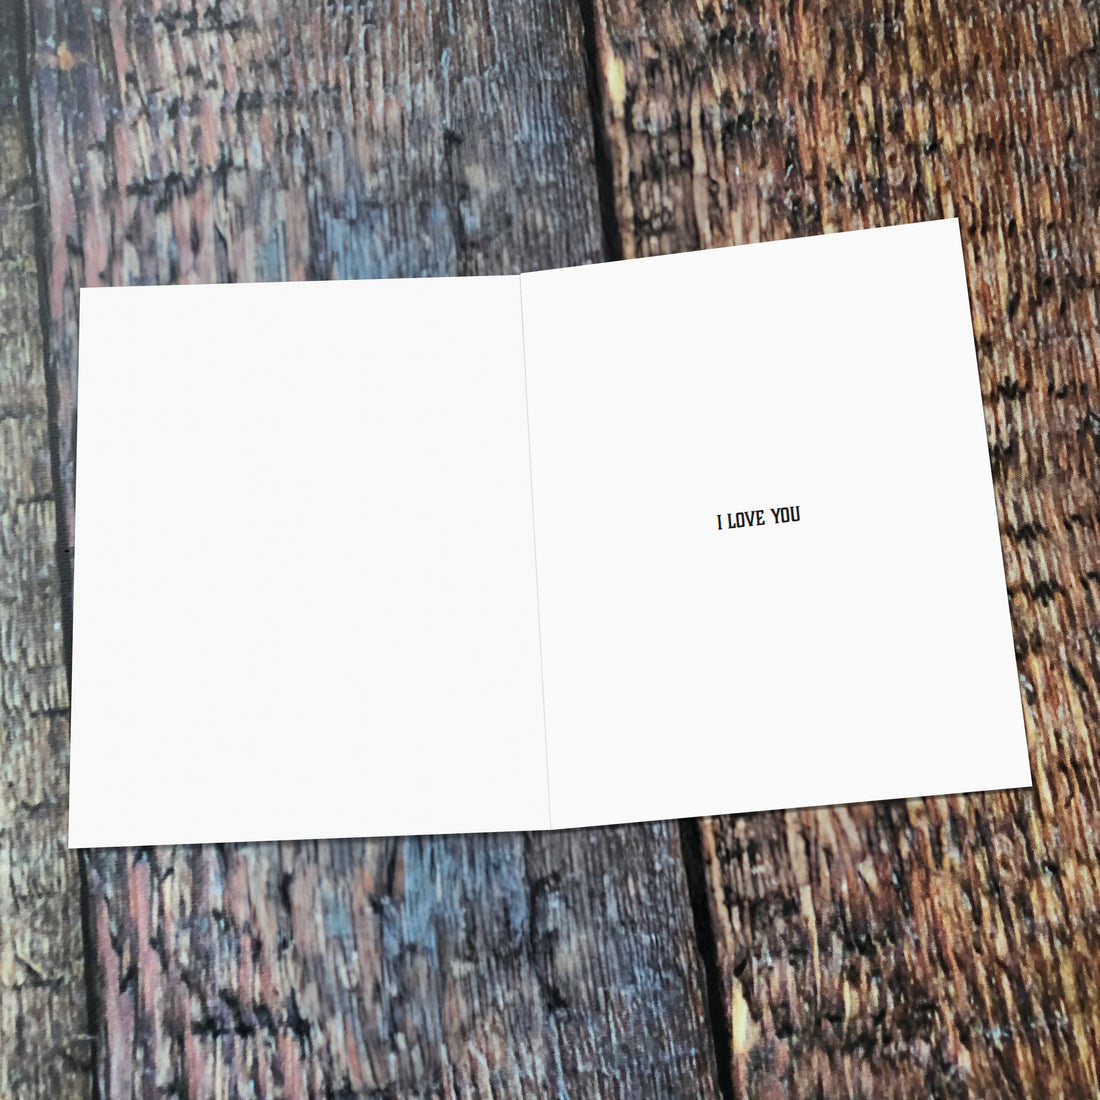 Greeting Card: Salty, This is turning into the longest one night stand ever - Pack of 6